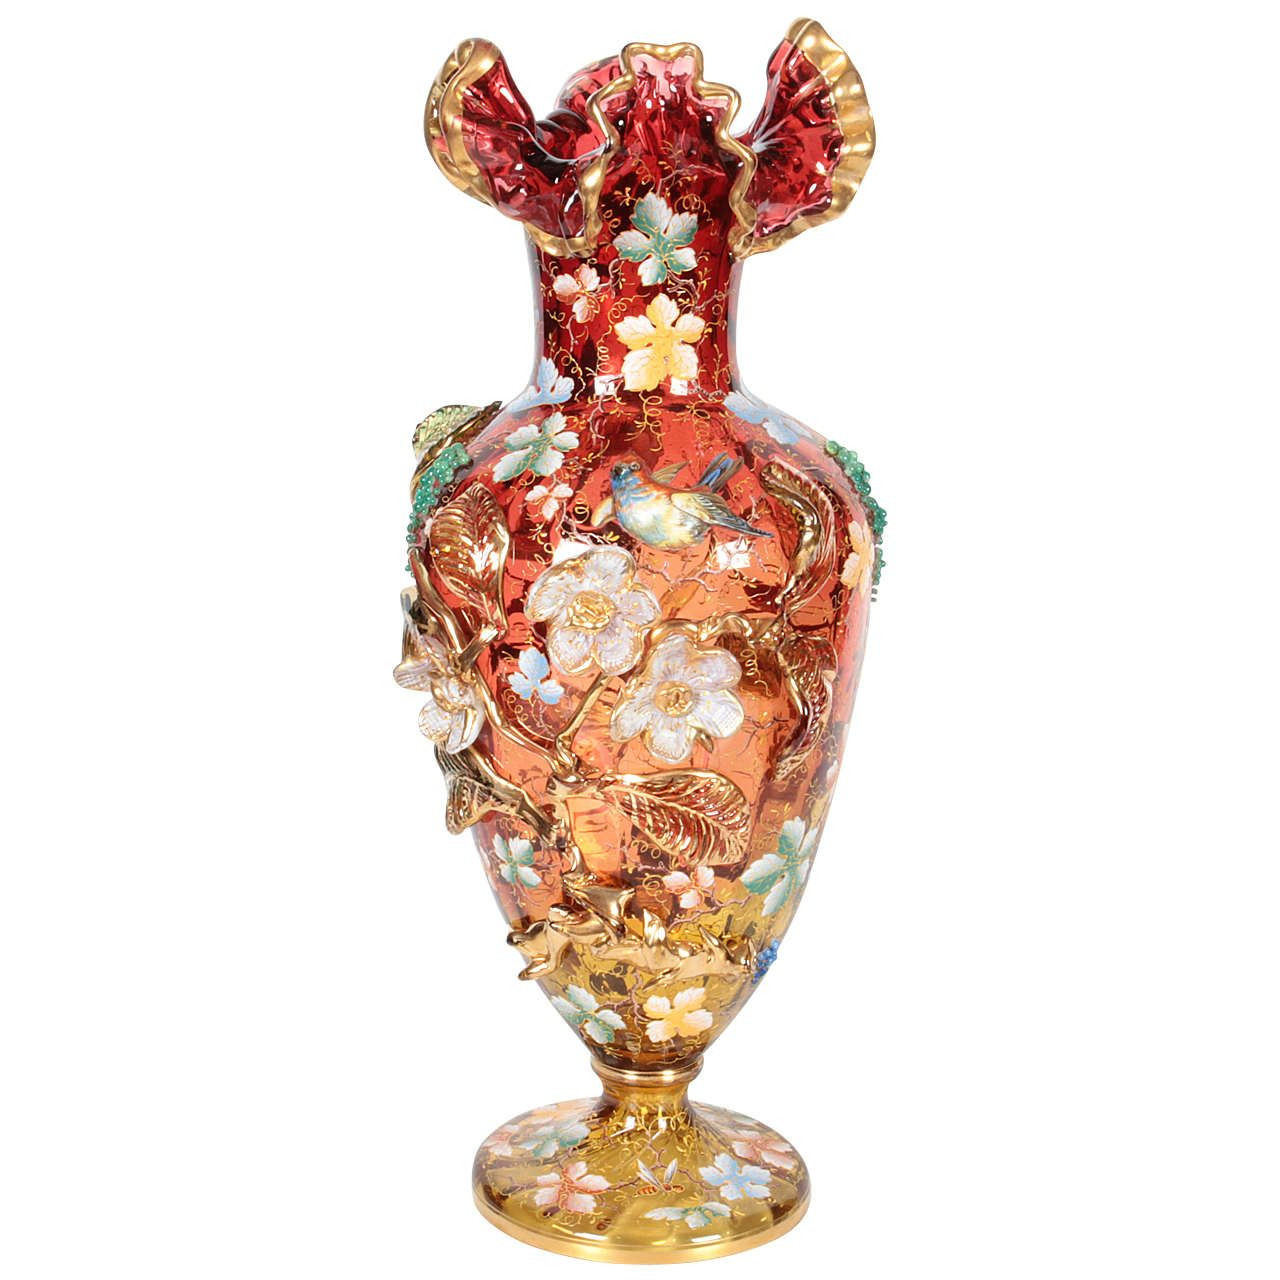 antique crystal vases of moser glass amberina red vase with raised flowers leaves jewels in moser glass amberina red vase with raised flowers leaves jewels and bird from a unique collection of antique and modern glass at